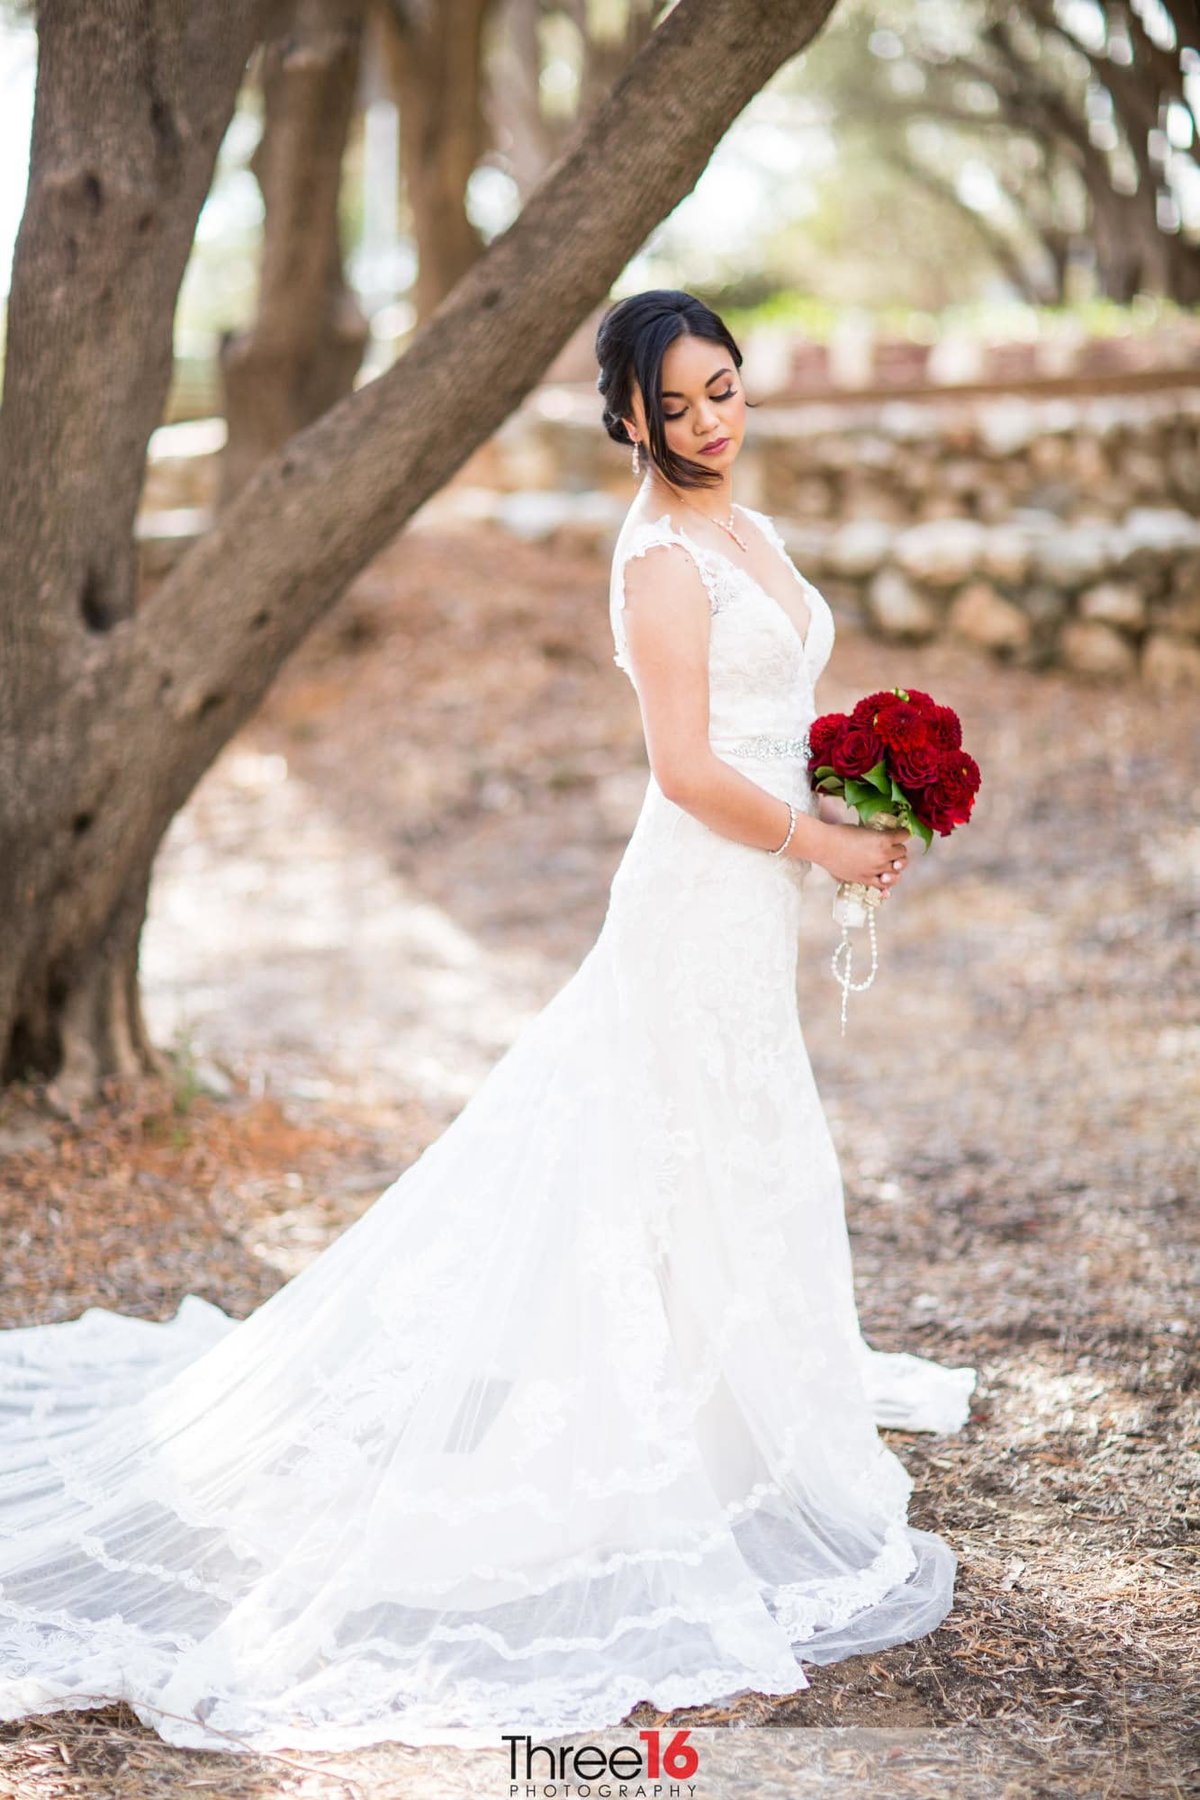 Beautiful Bride poses with her dress fanned out under a tree